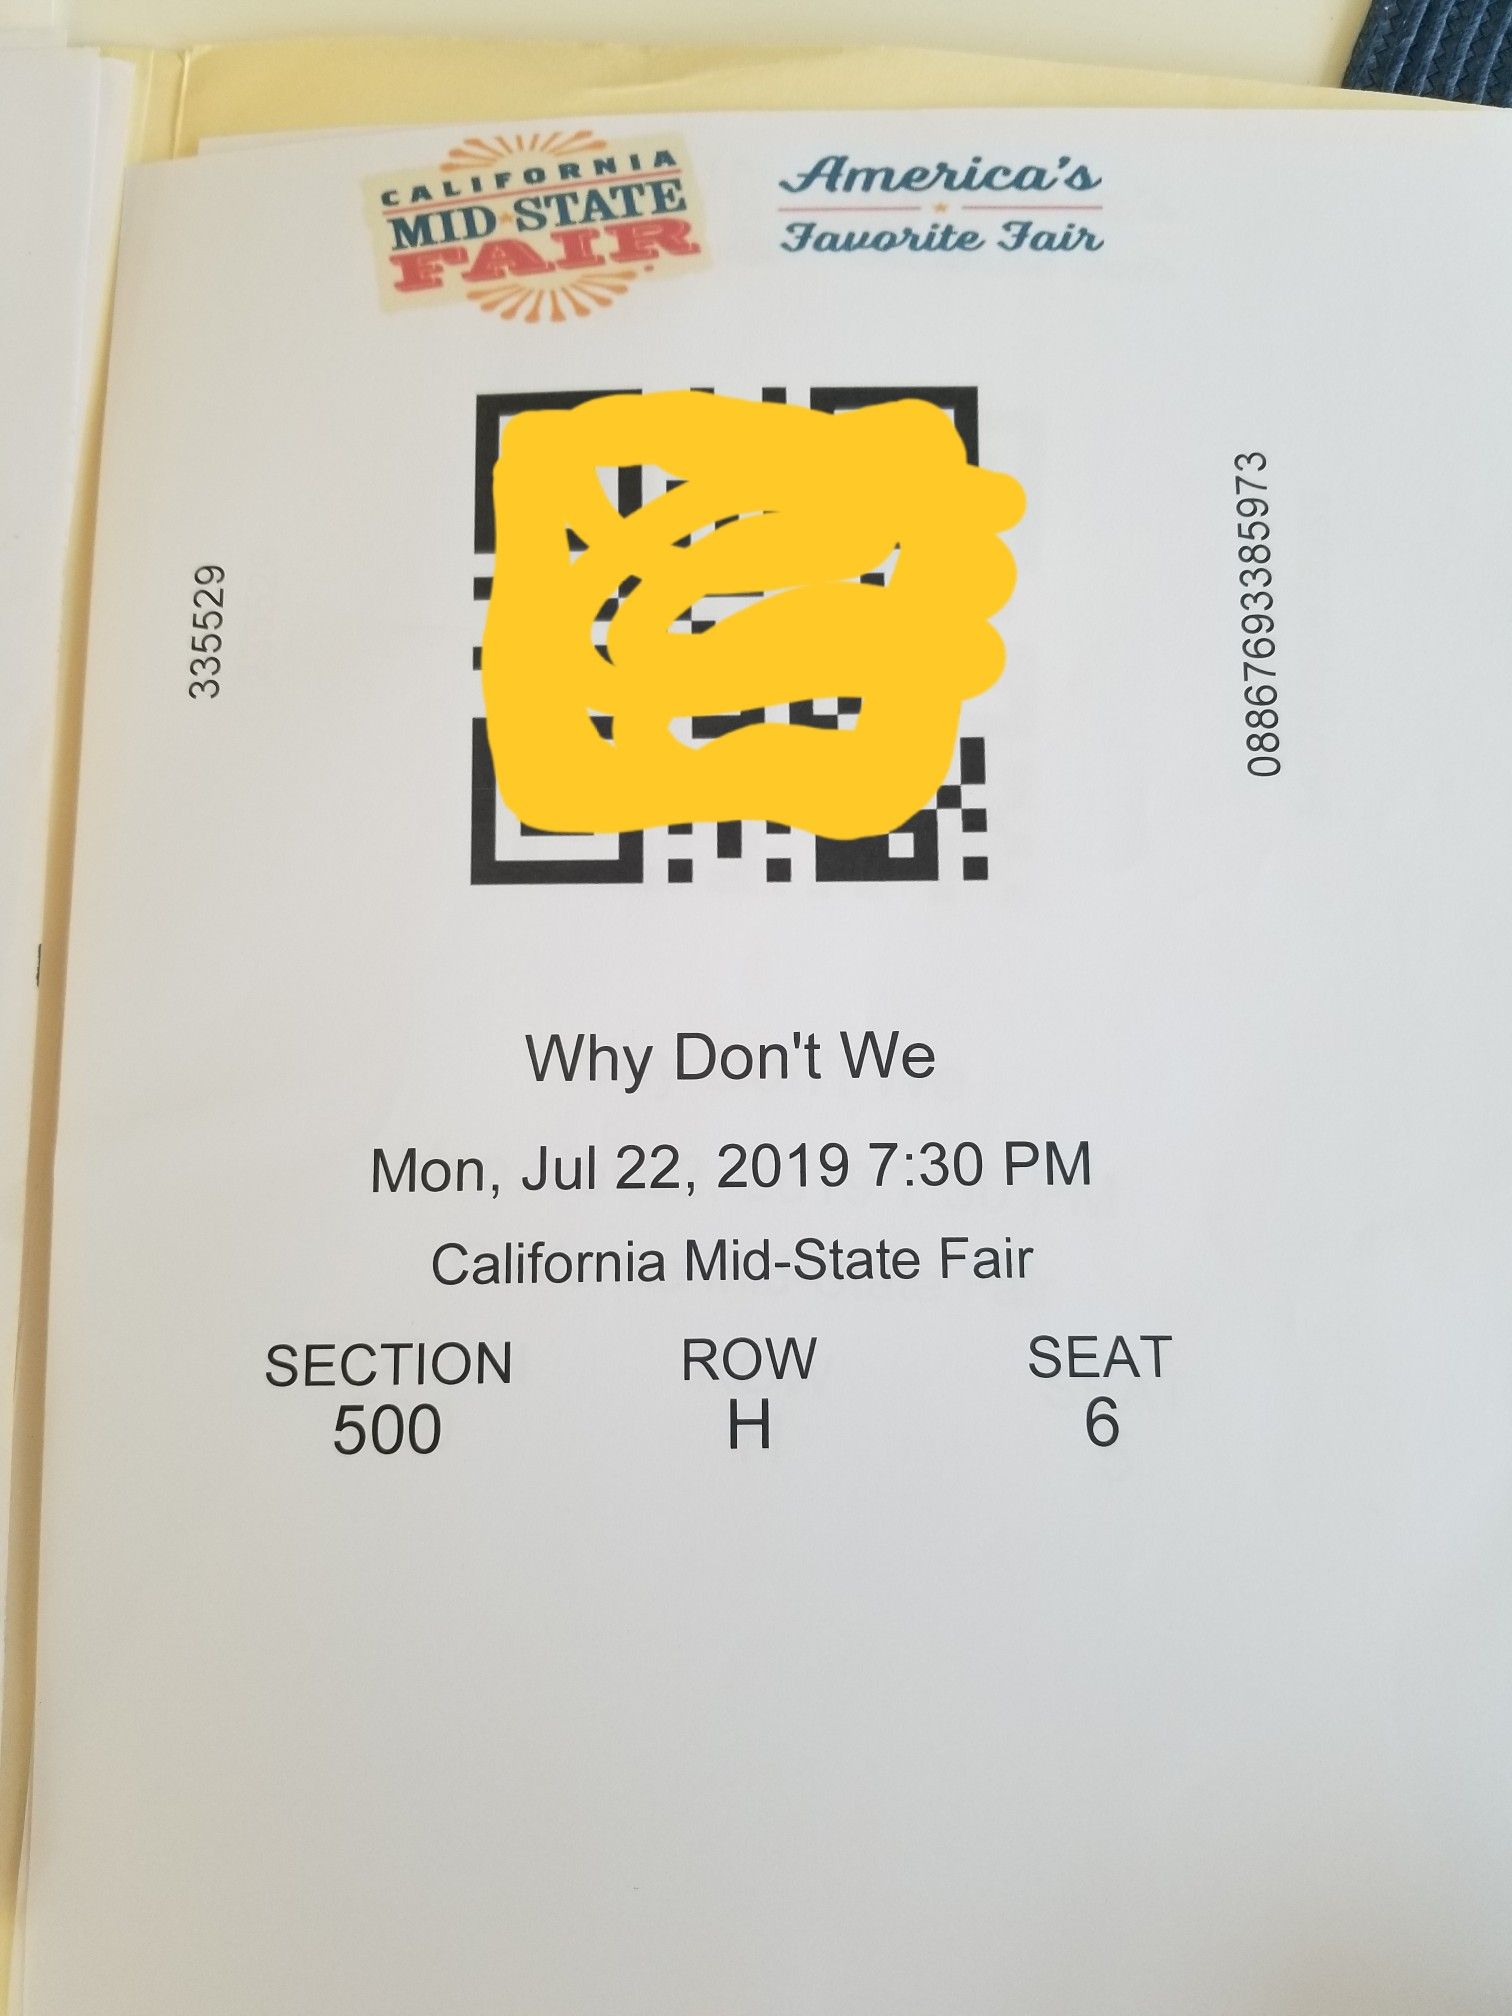 "Why Don't We" tickets Midstate Fair